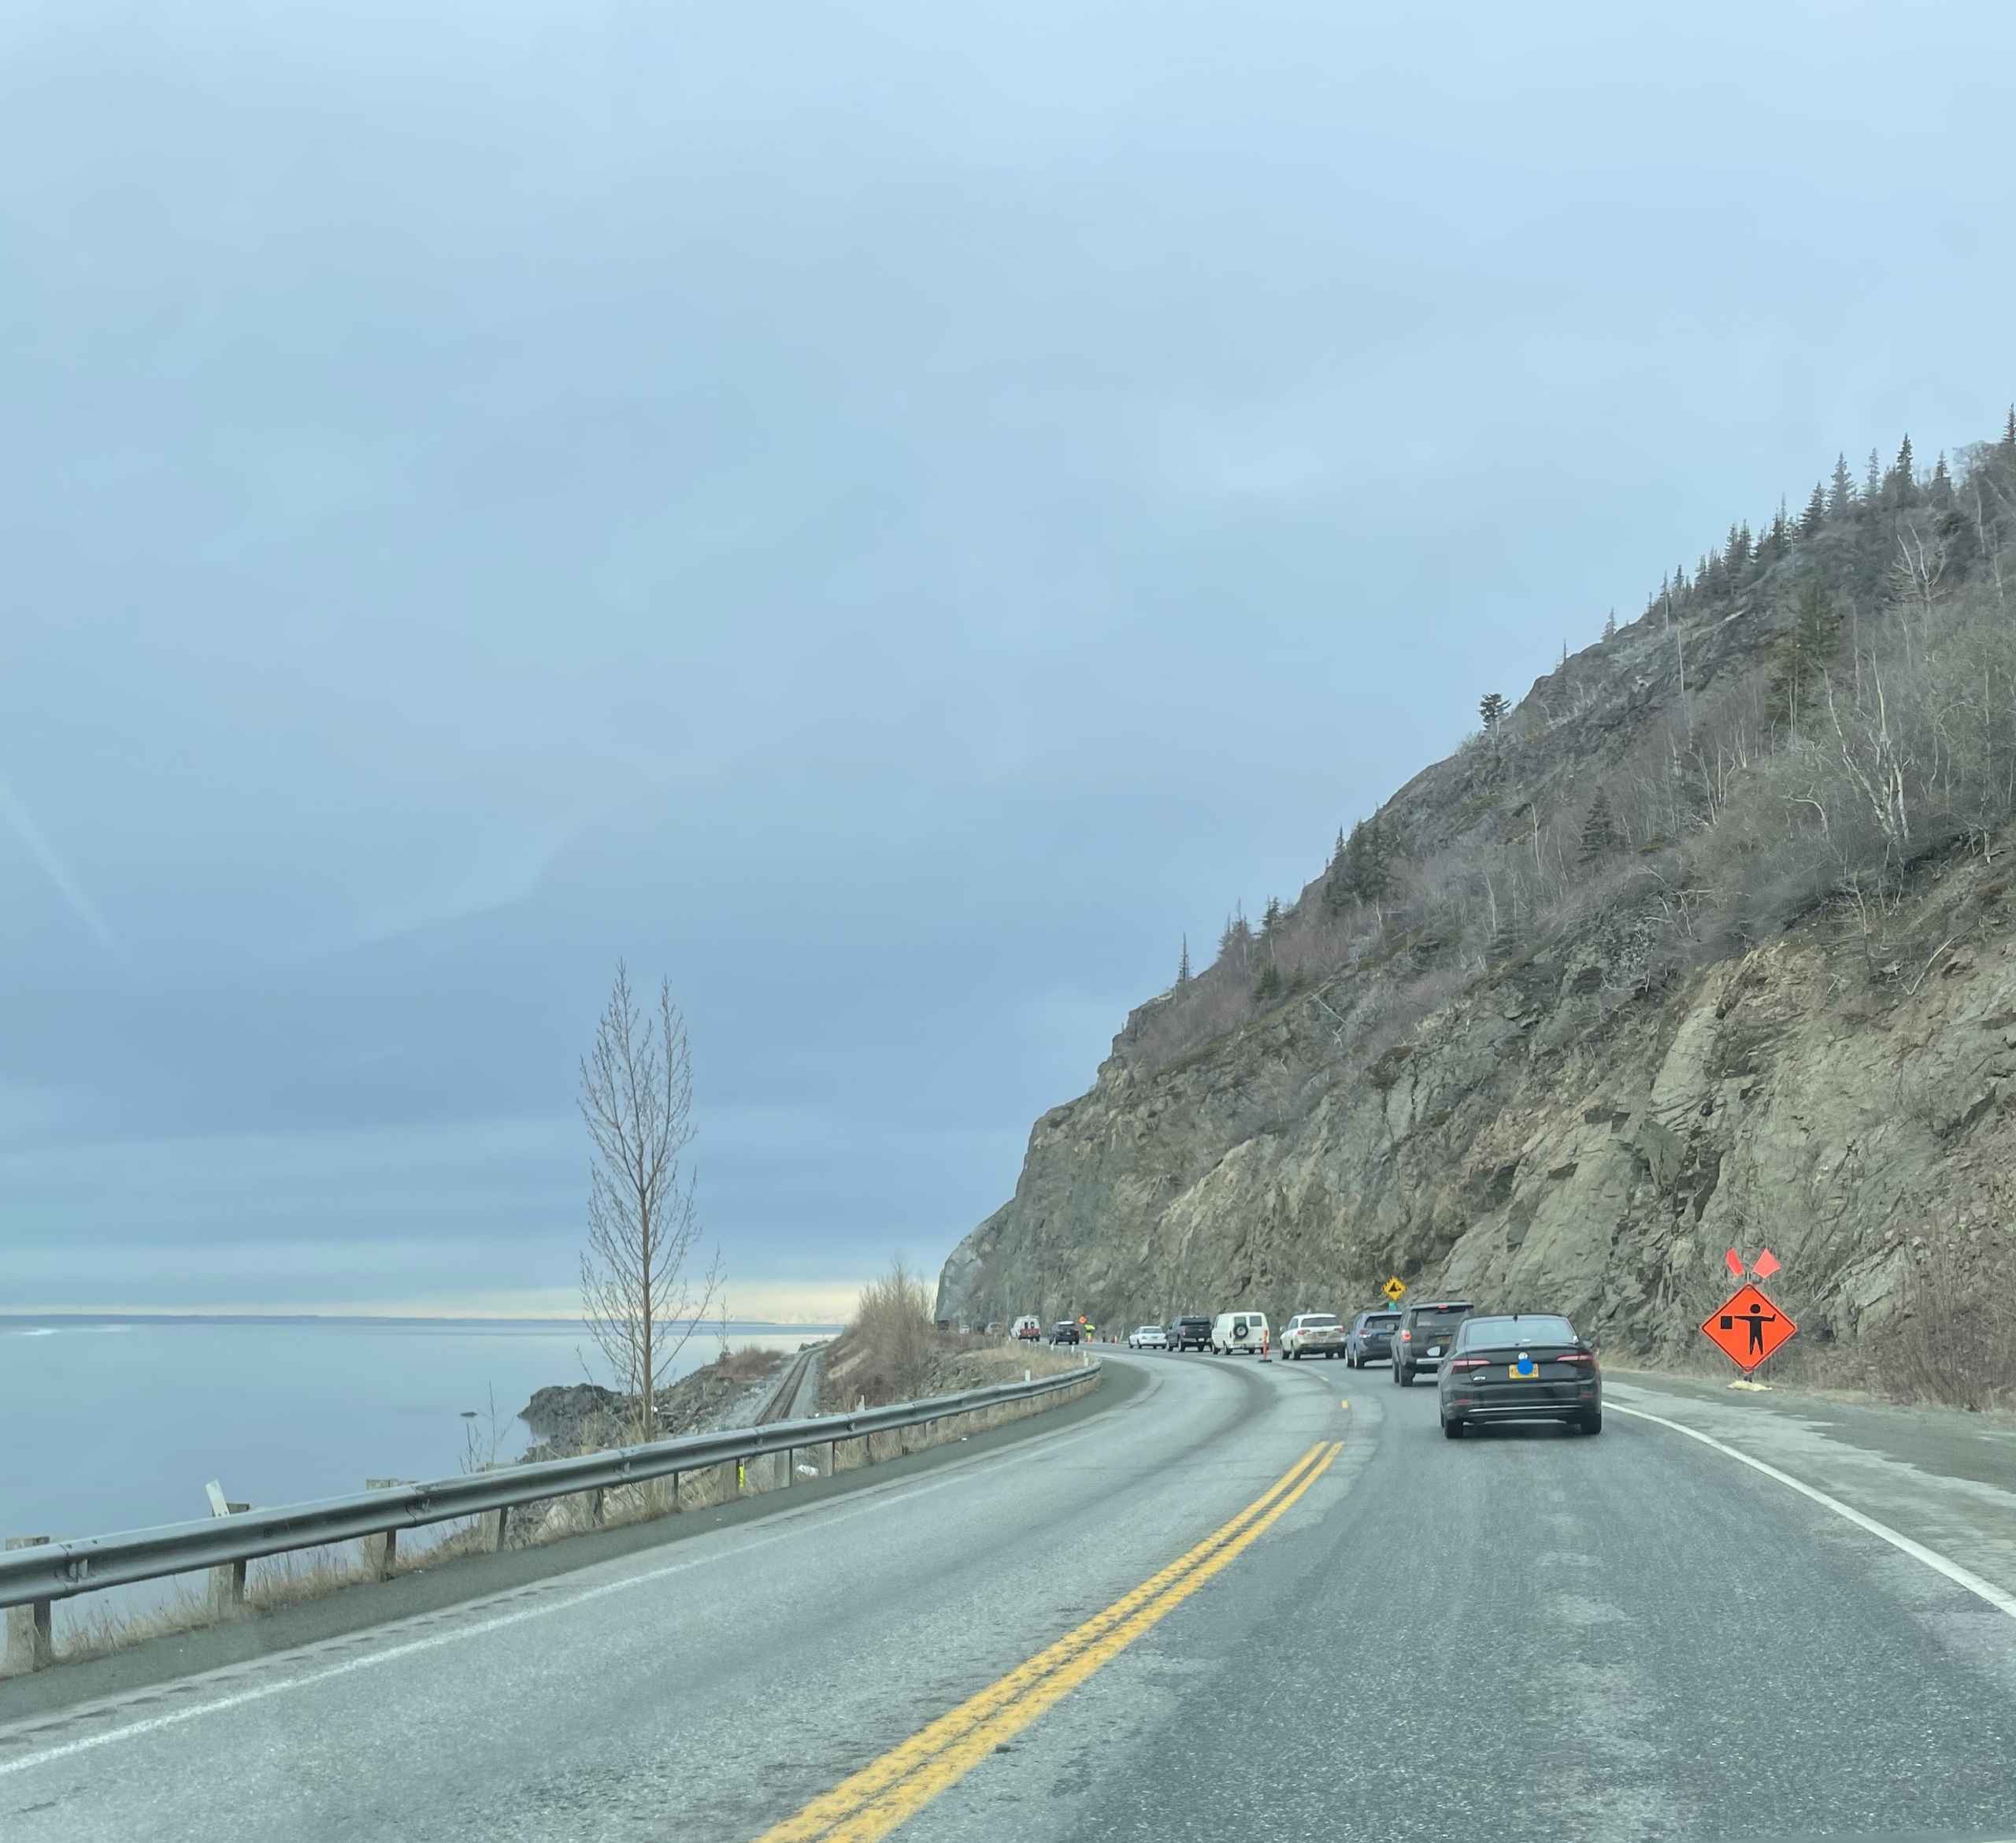 photo of cars lined up for construction on Seward Highway, train tracks visible.